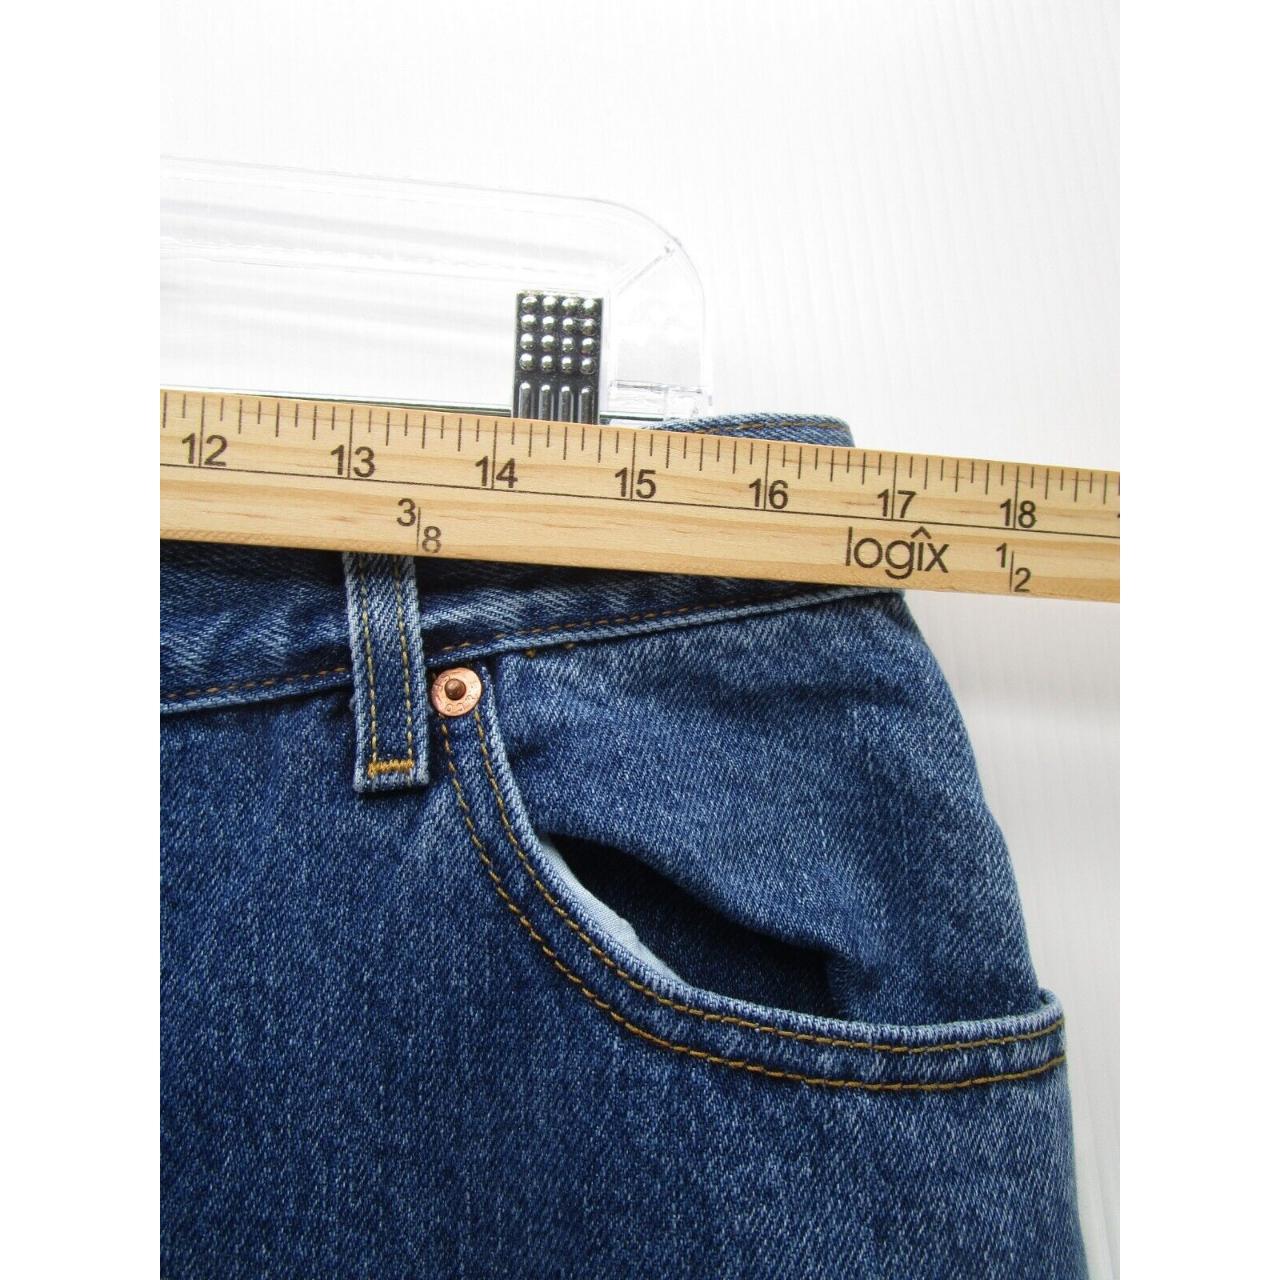 Levis 550 Jeans Women 16 Short Blue Relaxed Tapered... - Depop